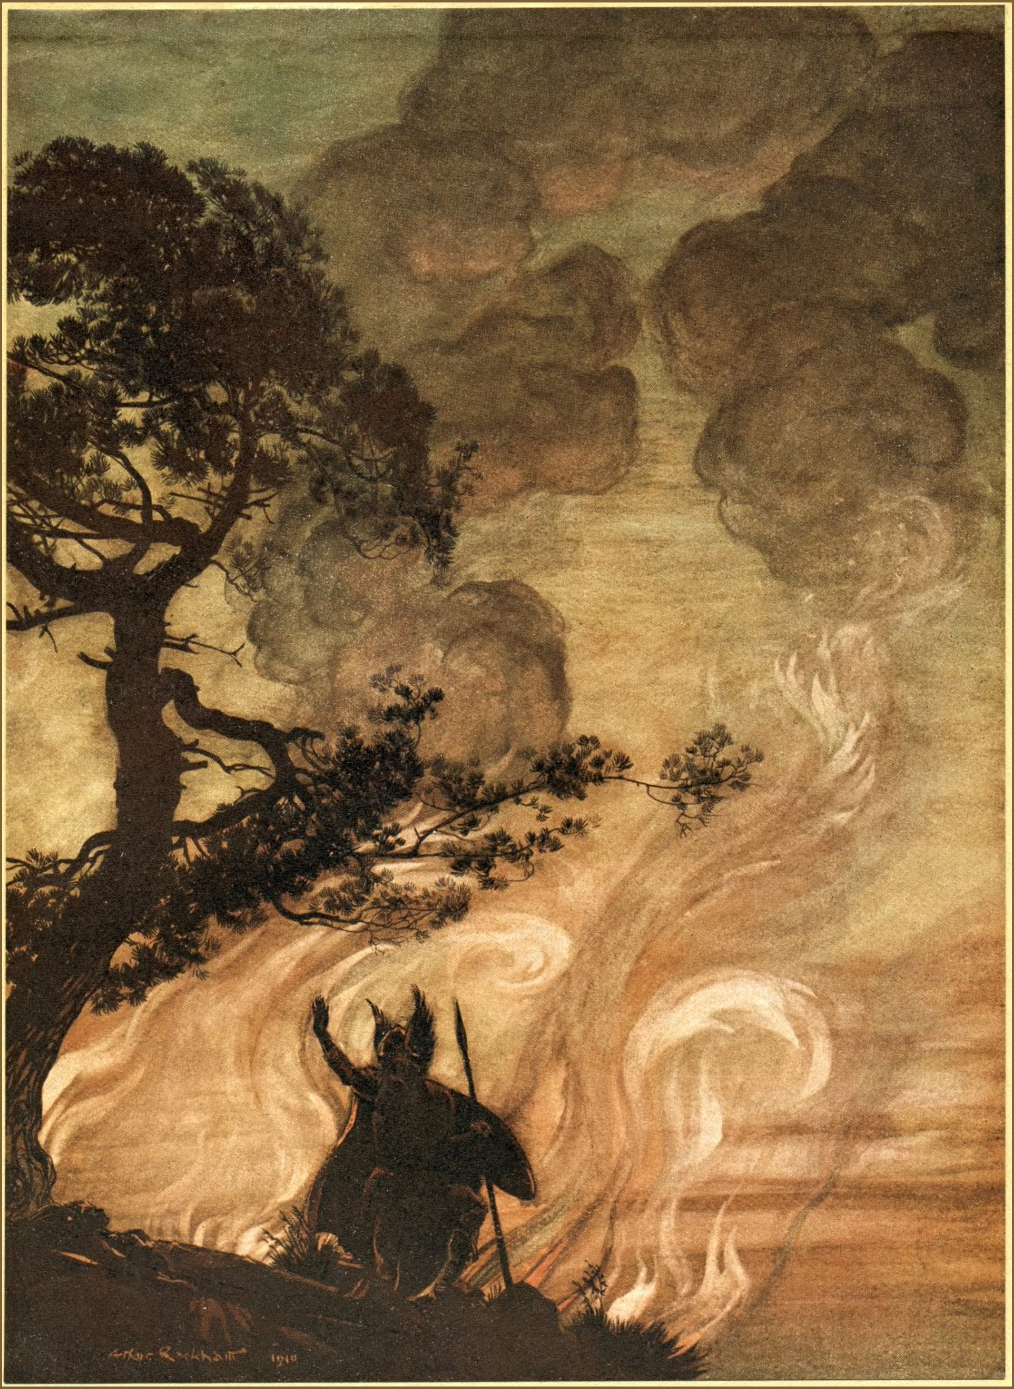 painting with brown ink of a man on horseback near a tree